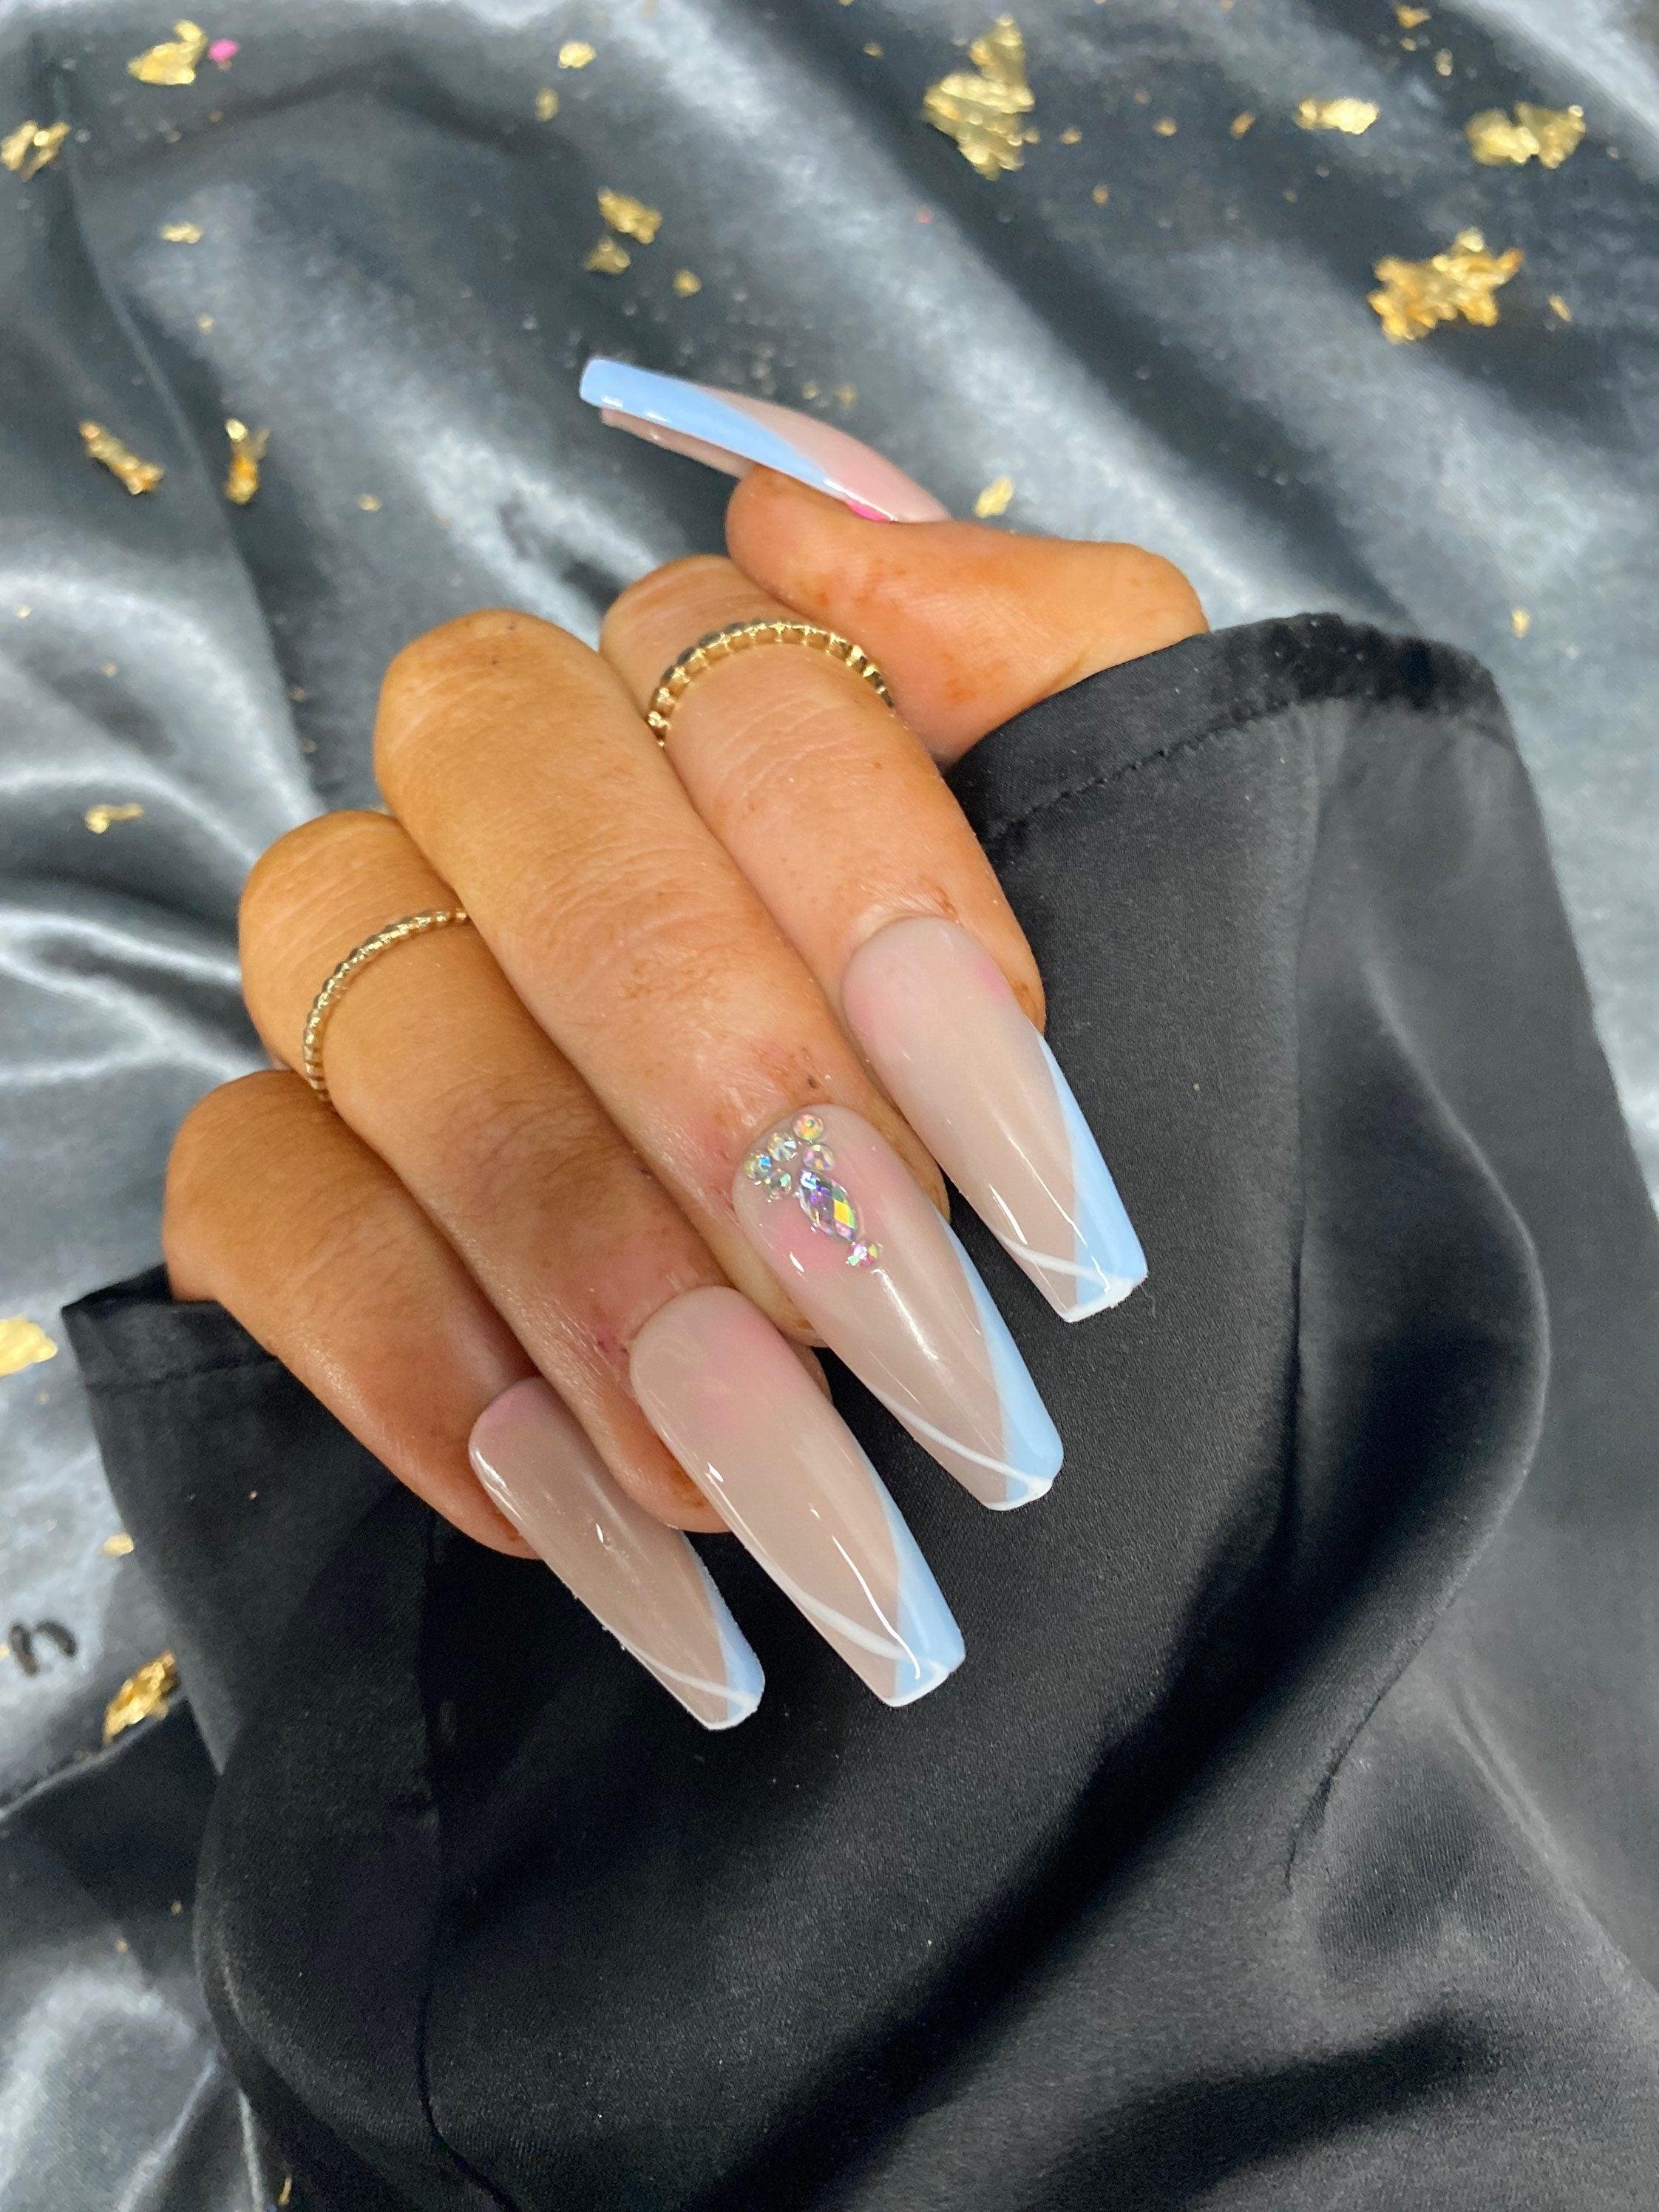 Mom Gets Shamed For Baby's Nails After Sharing Photo Of Her Manicure |  iHeart